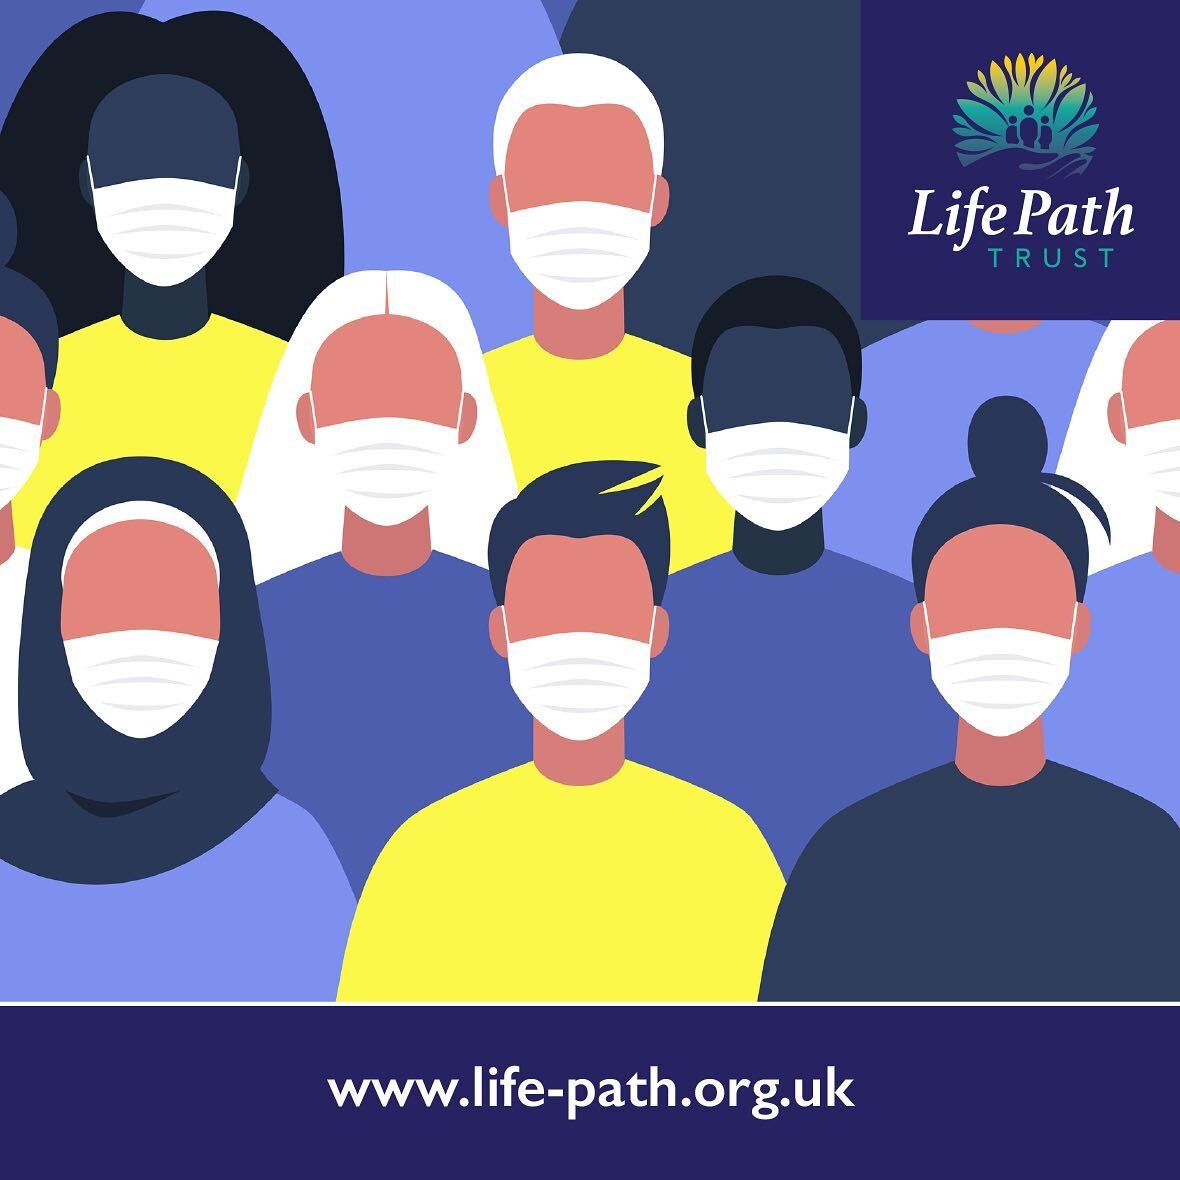 On 19th July Life Path is continuing with our current safe COVID arrangements and will not be making any changes to the wearing of Face Coverings.
www.life-path.org.uk #charity #care #carers #coventry #supportathome #support #learningdisabilities #le